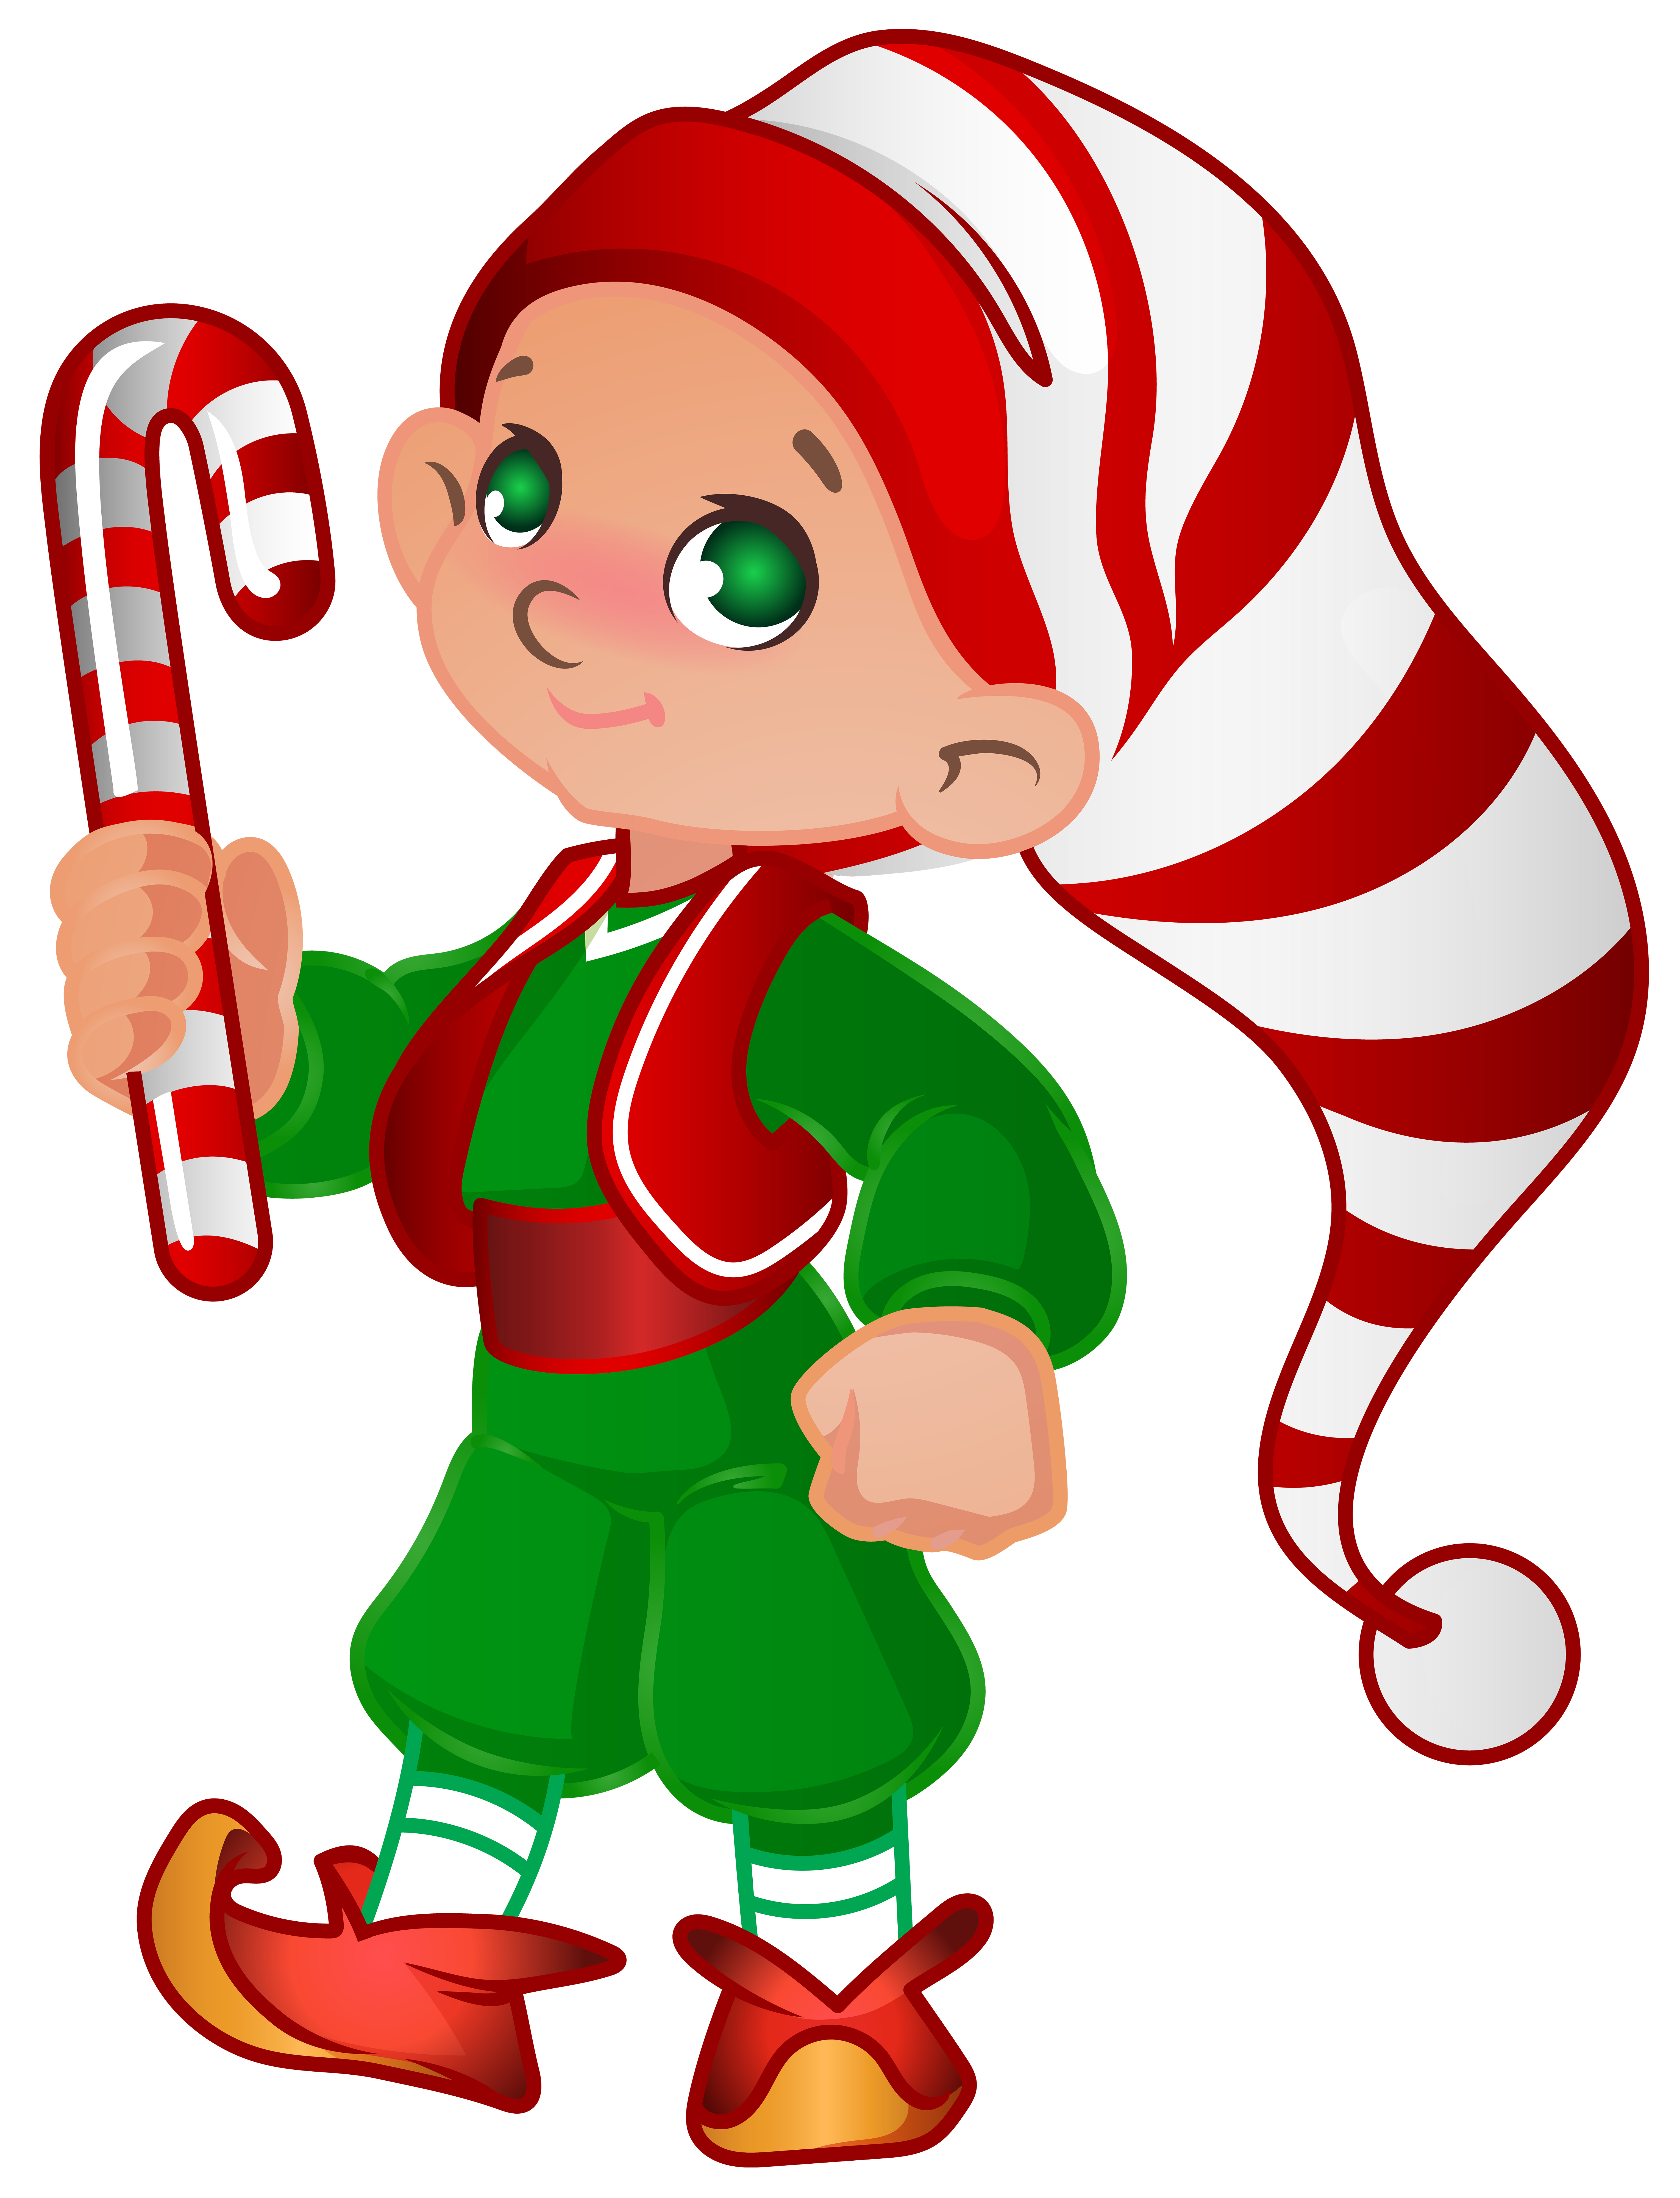 Transparent Elf On The Shelf Clipart The Elf On The Shelf Png Free